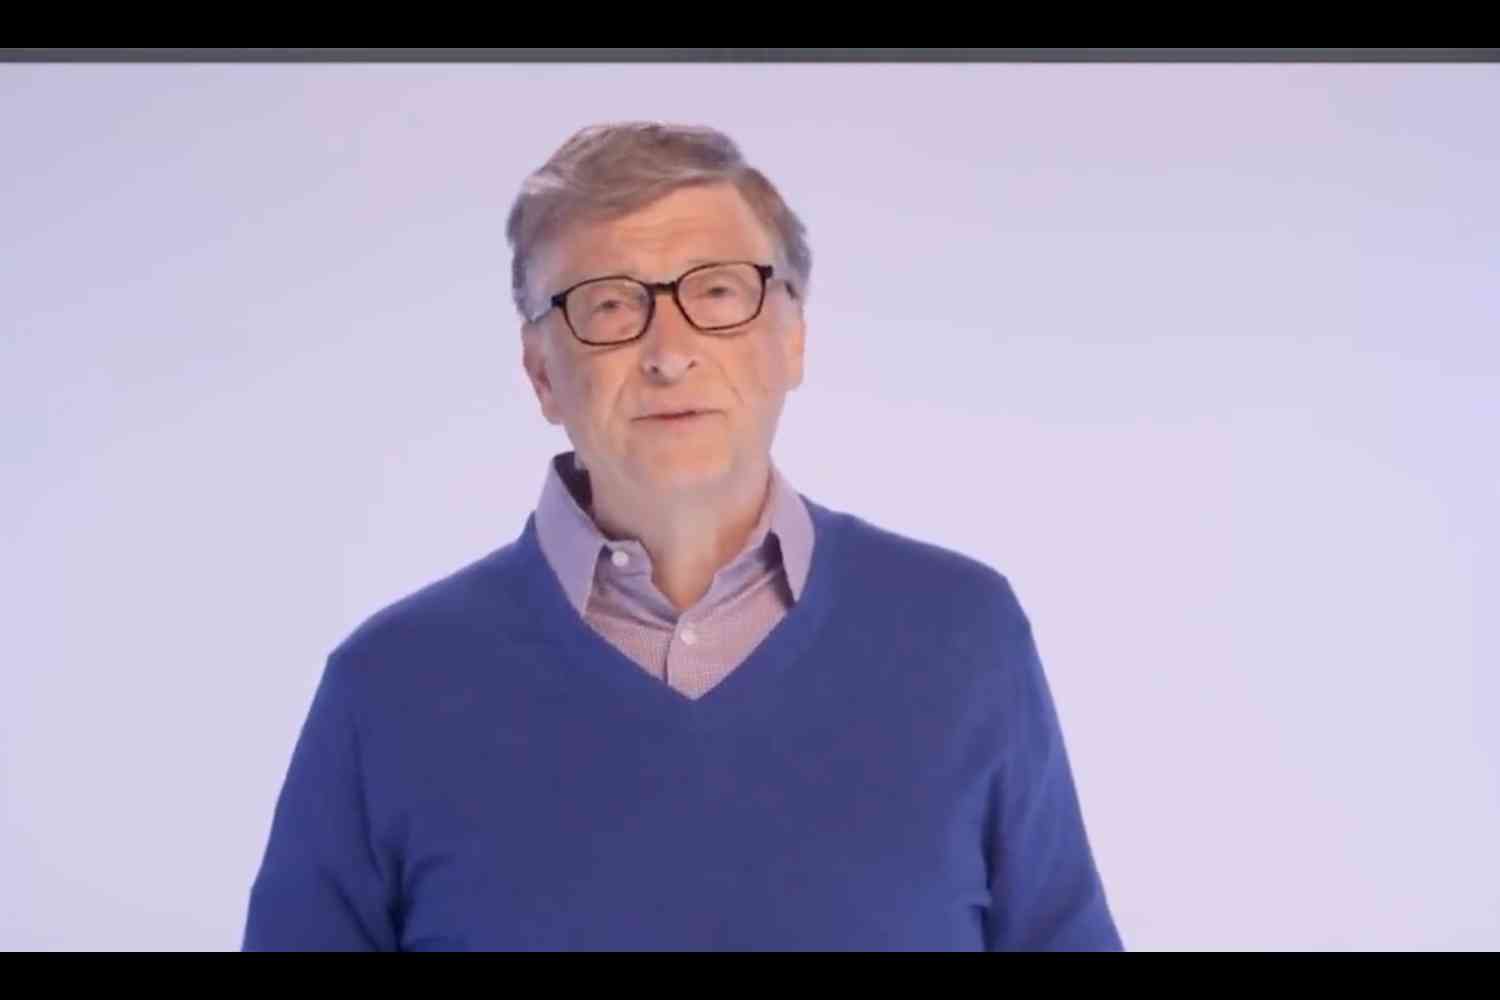 Nothing to see here, just Bill Gates explaining how to reduce the Earth's population to save the planet